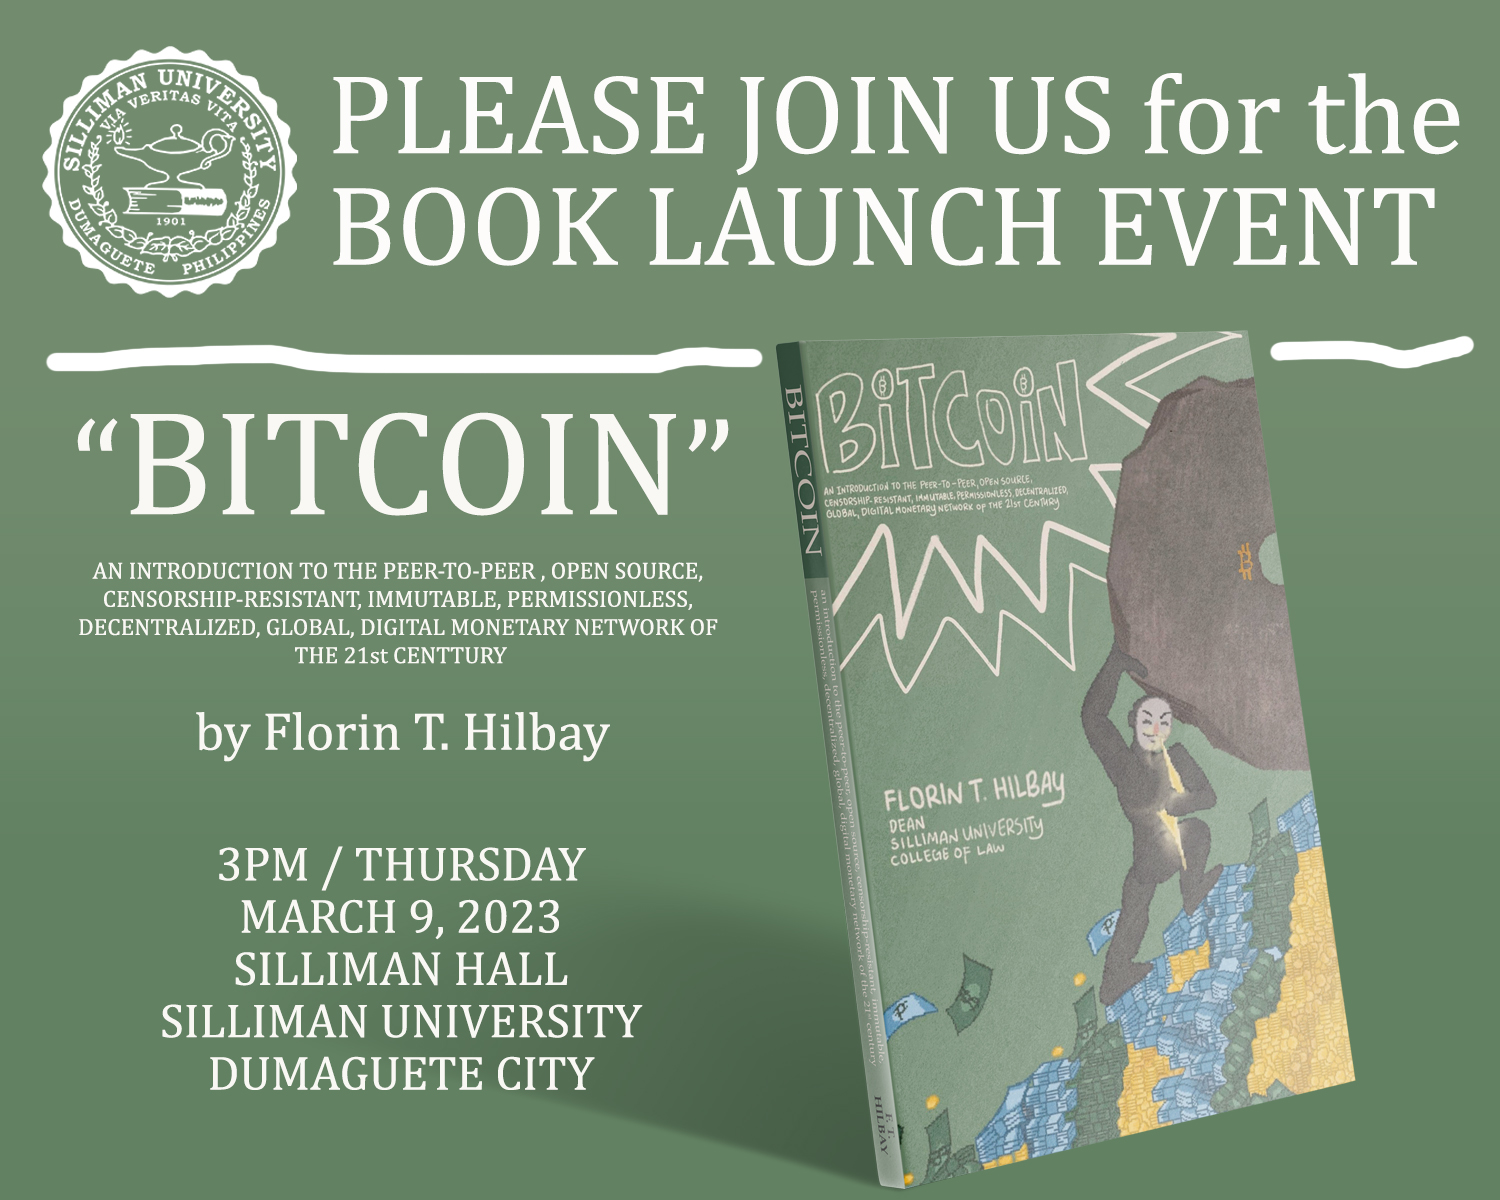 Book Launch Event for “Bitcoin” by Florin T. Hilbay